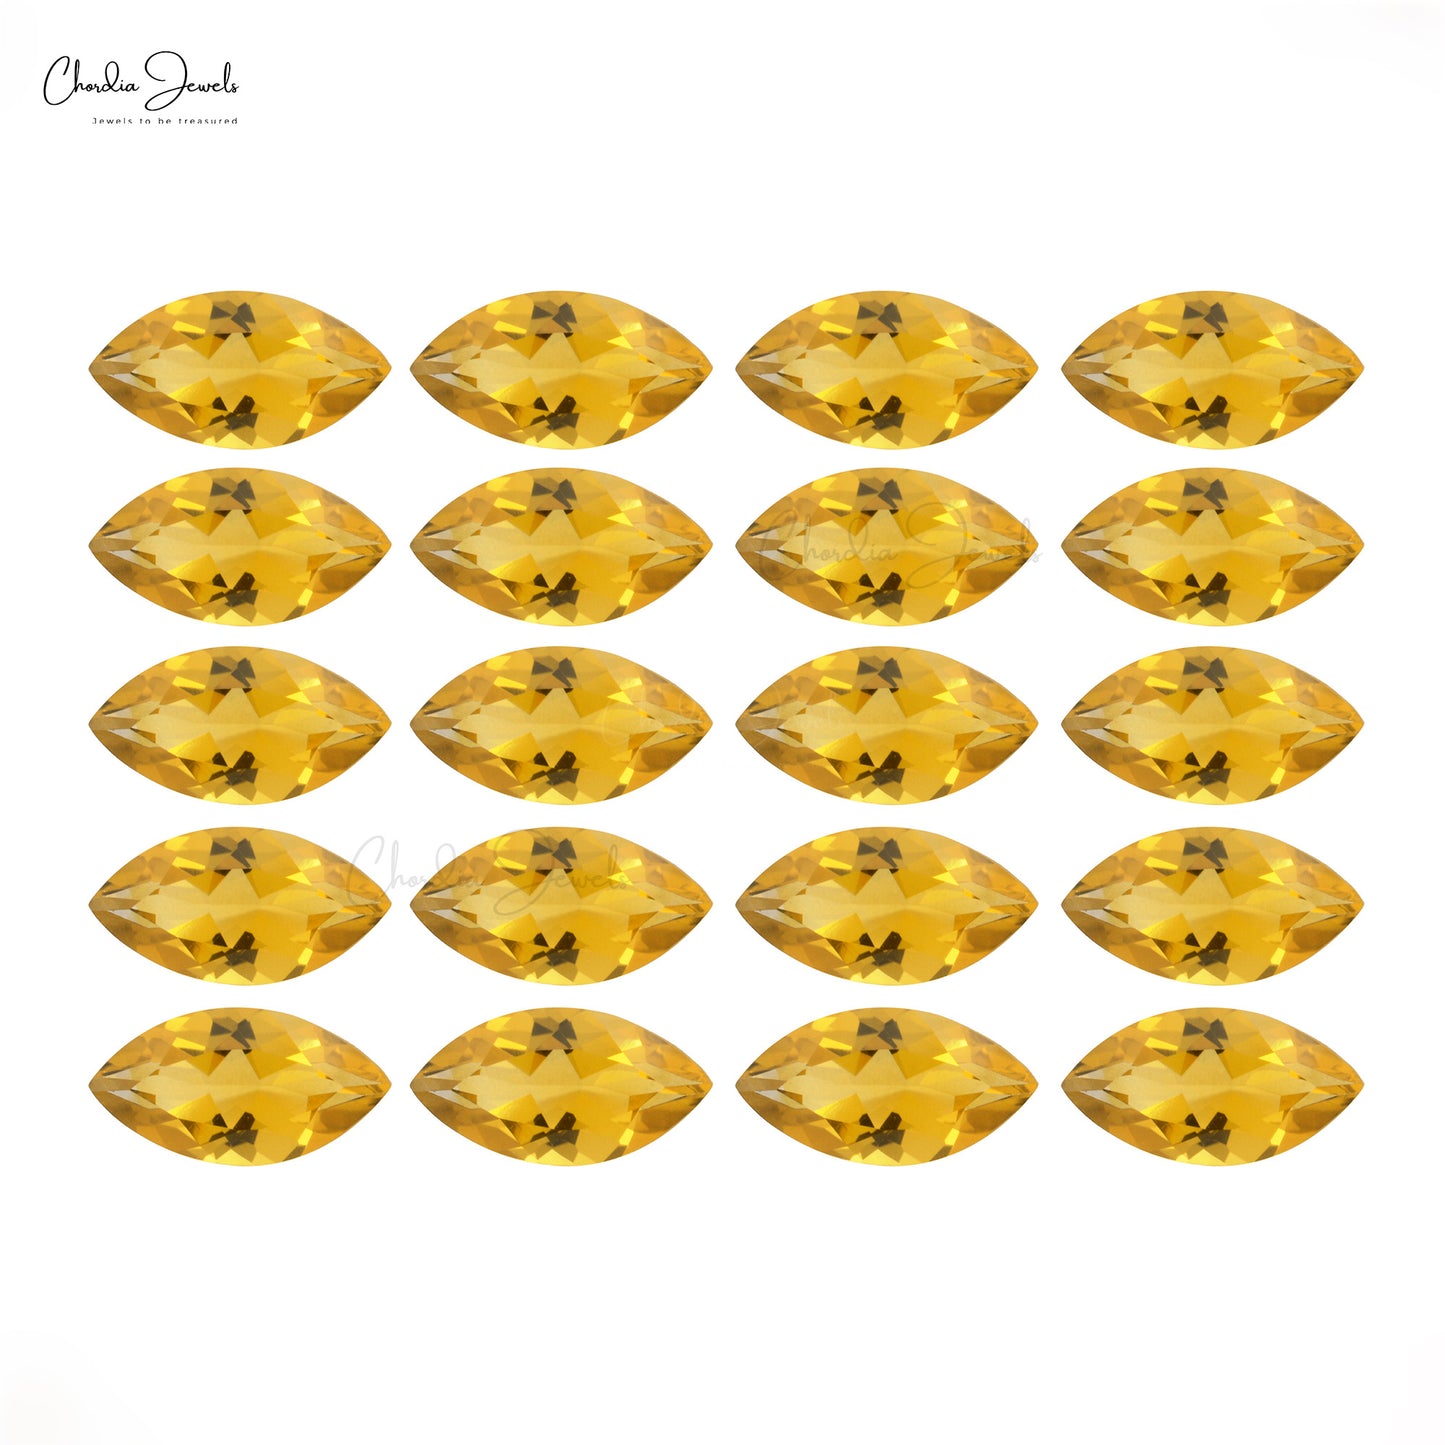 9X4.50 MM Brazilian Citrine Marquise Cut at Discount Price, 1 Piece